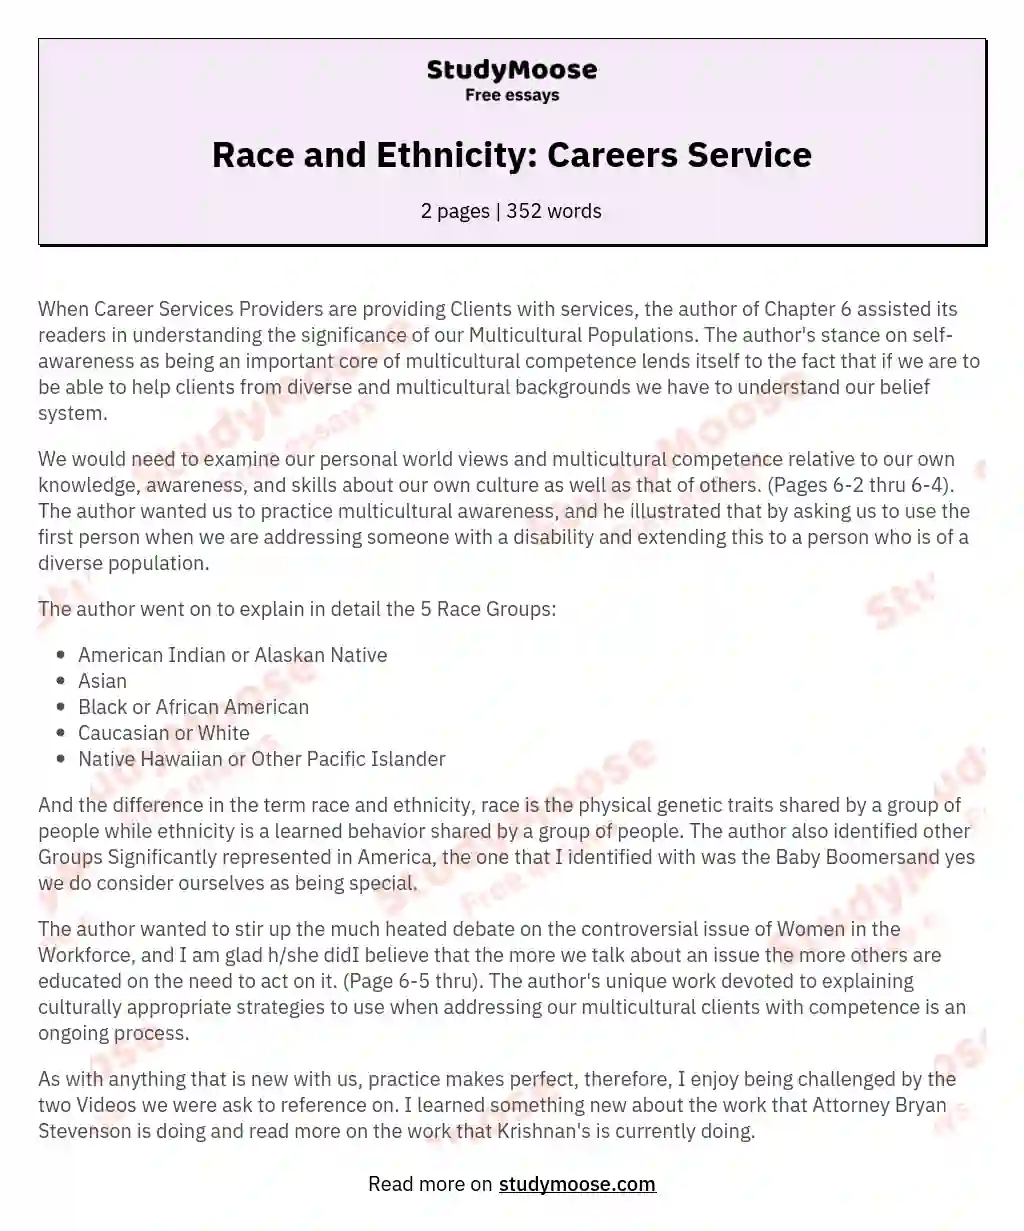 Race and Ethnicity: Careers Service essay